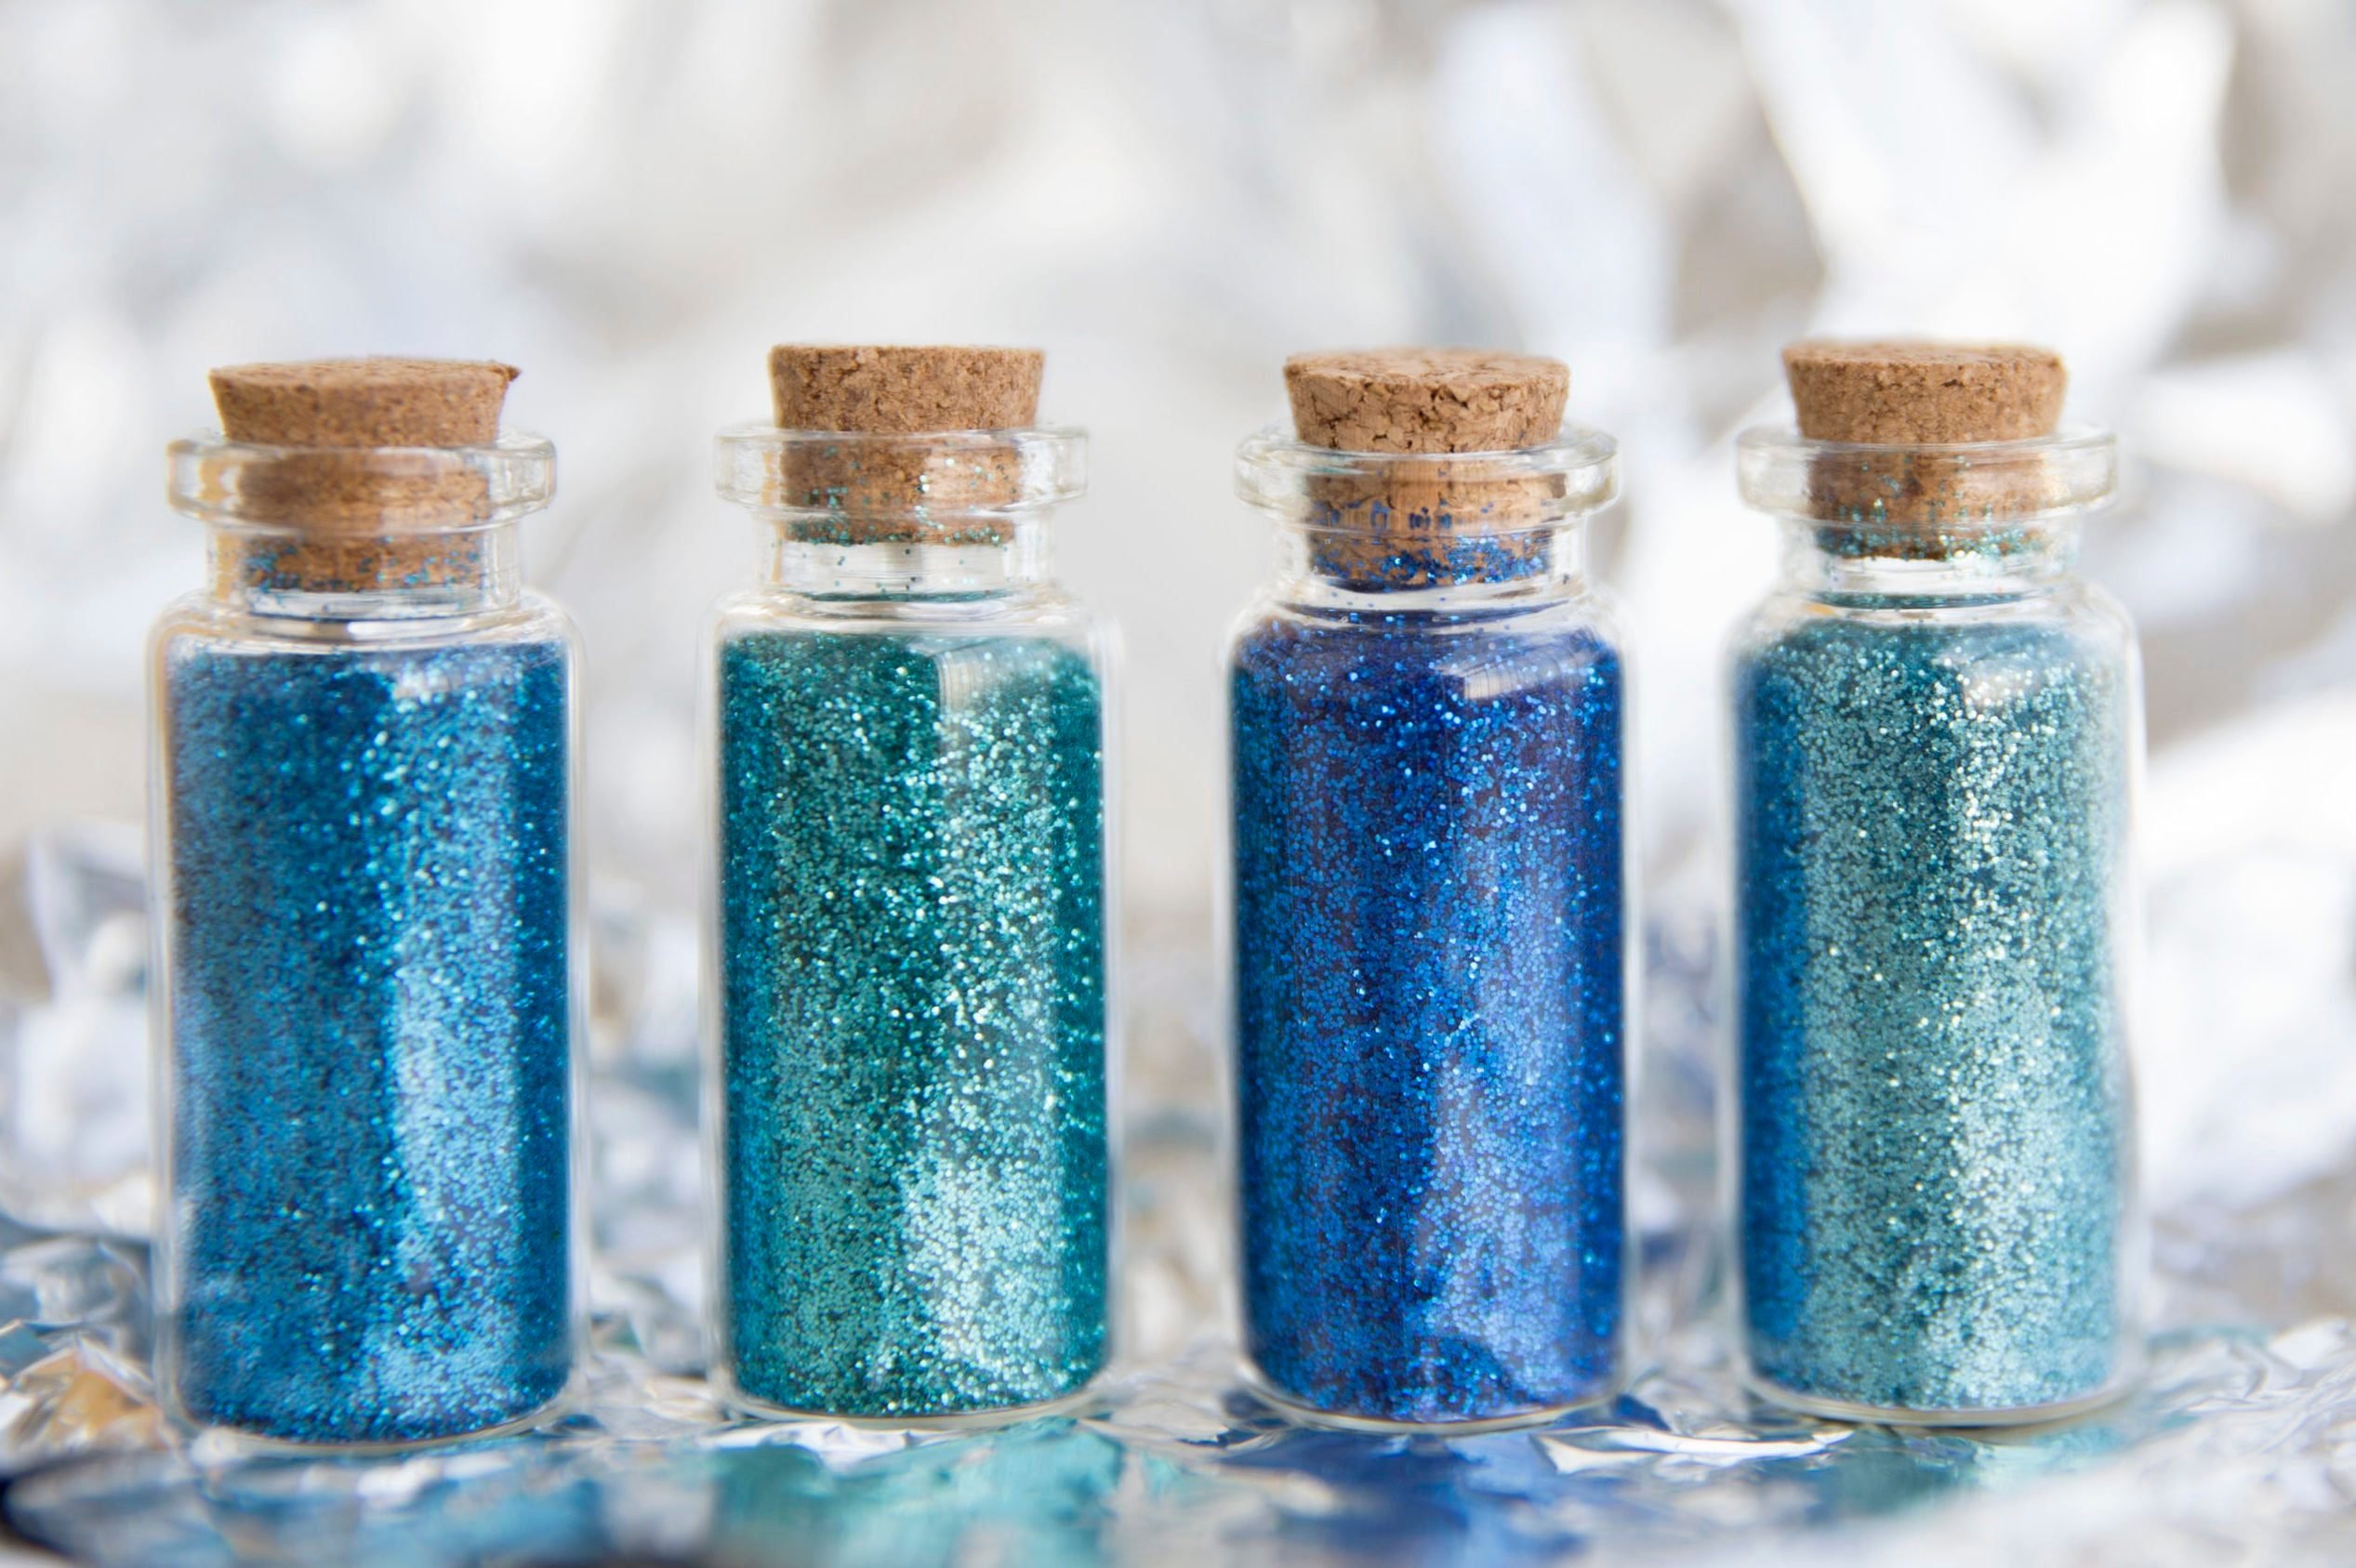 Close-Up Of Glitter Bottles On Table